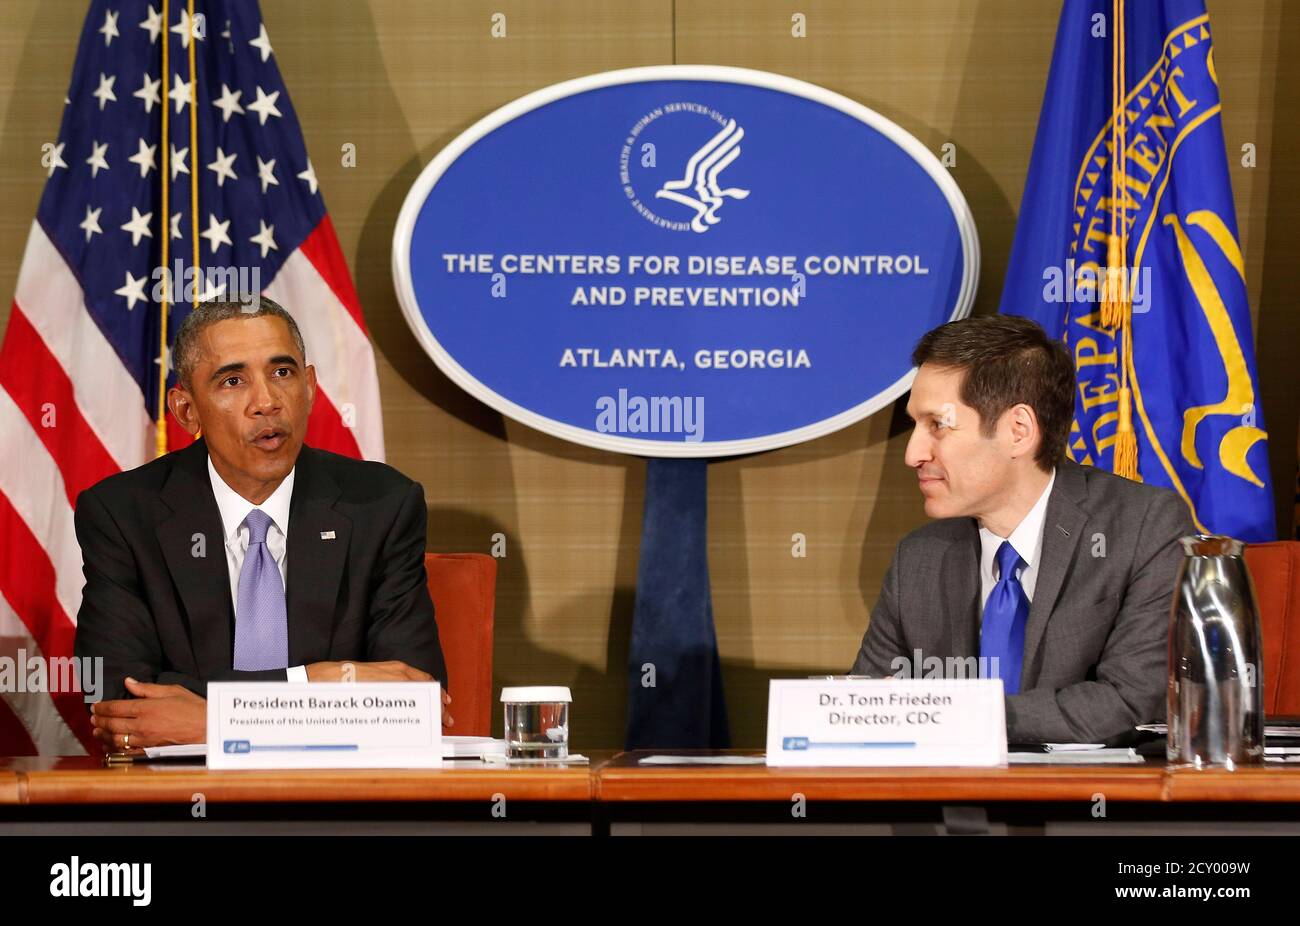 U.S. President Barack Obama sits next to the Director of the CDC Tom Frieden as he participates in a briefing, on efforts to control the Ebola virus, at the Centers for Disease Control and Prevention in Atlanta, Georgia, September 16, 2014.      REUTERS/Larry Downing   (UNITED STATES - Tags: POLITICS HEALTH) Stock Photo